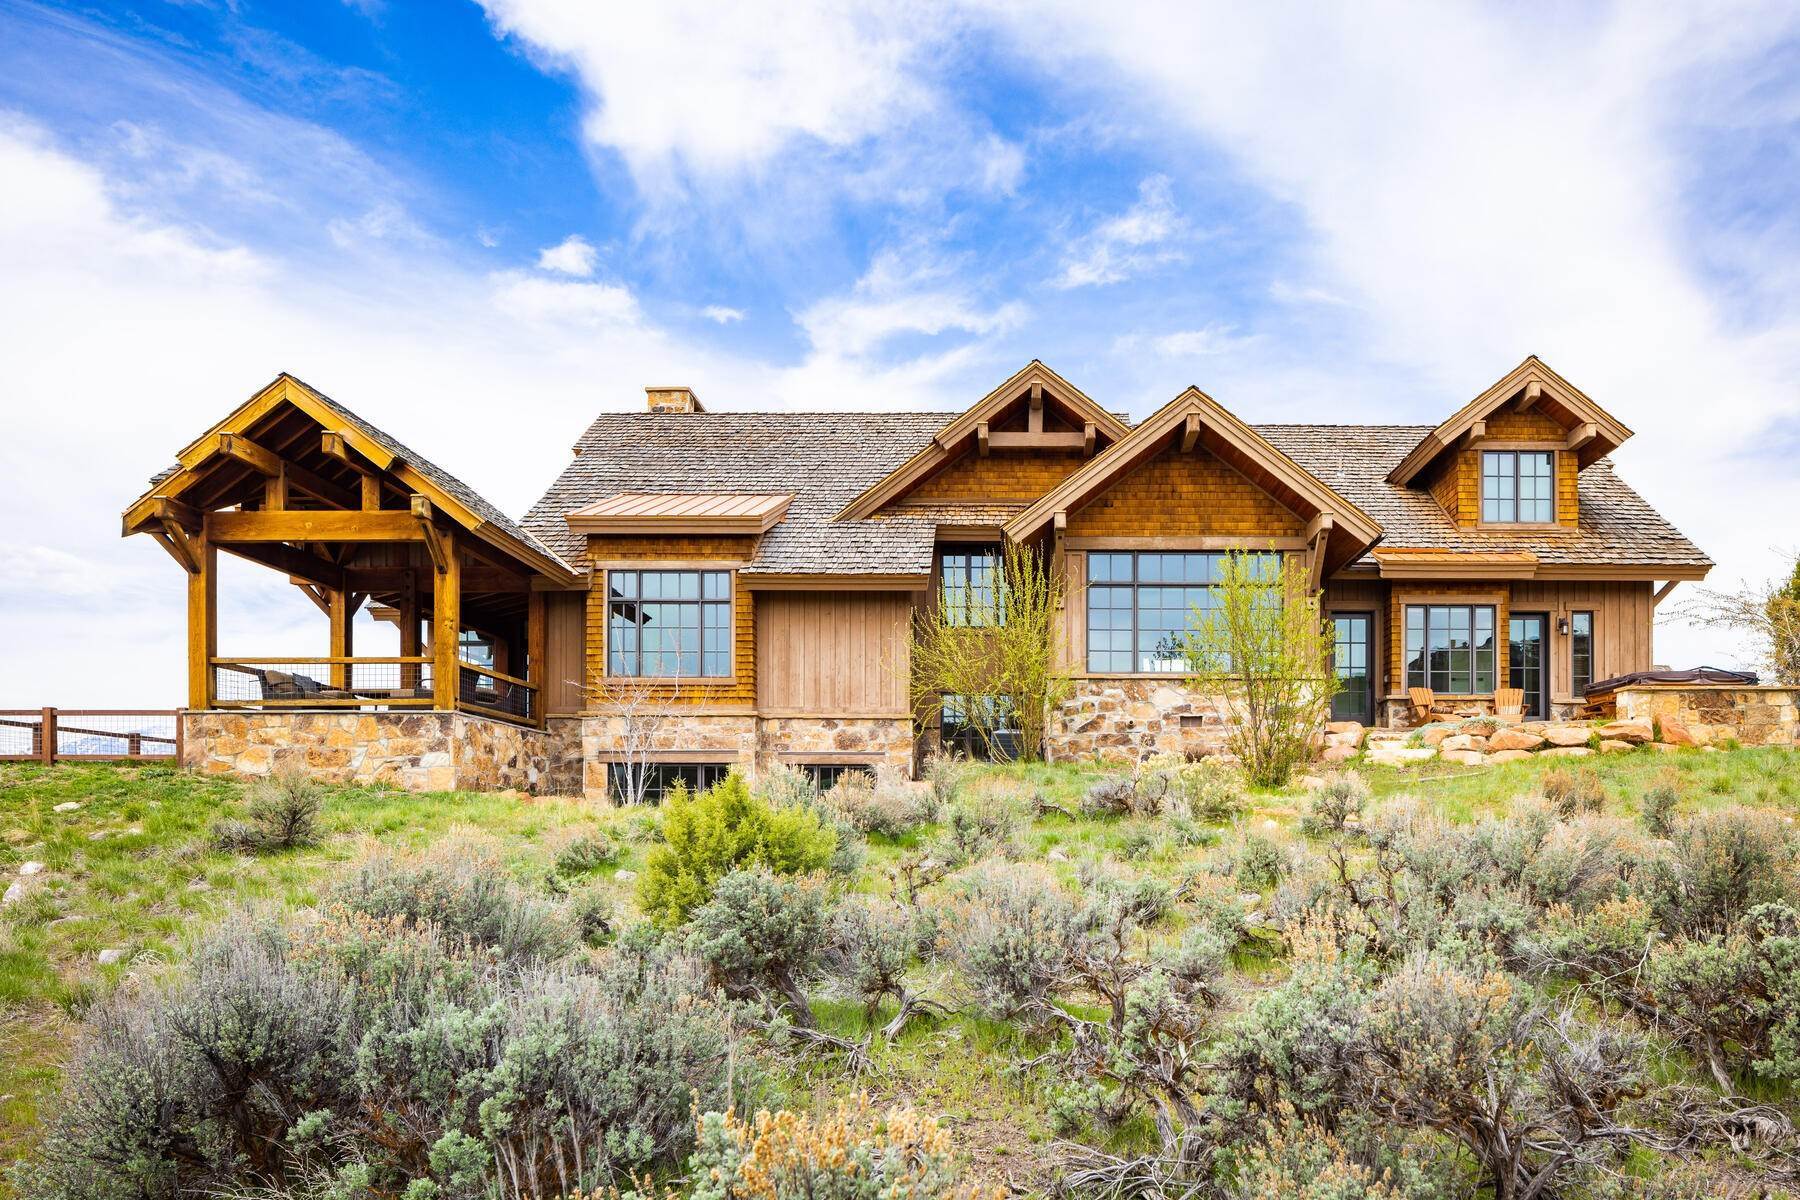 Single Family Homes for Sale at Great Entertaining Home Offering Multiple Outdoor Living Spaces And Views 940 N Chimney Rock Road Heber City, Utah 84032 United States